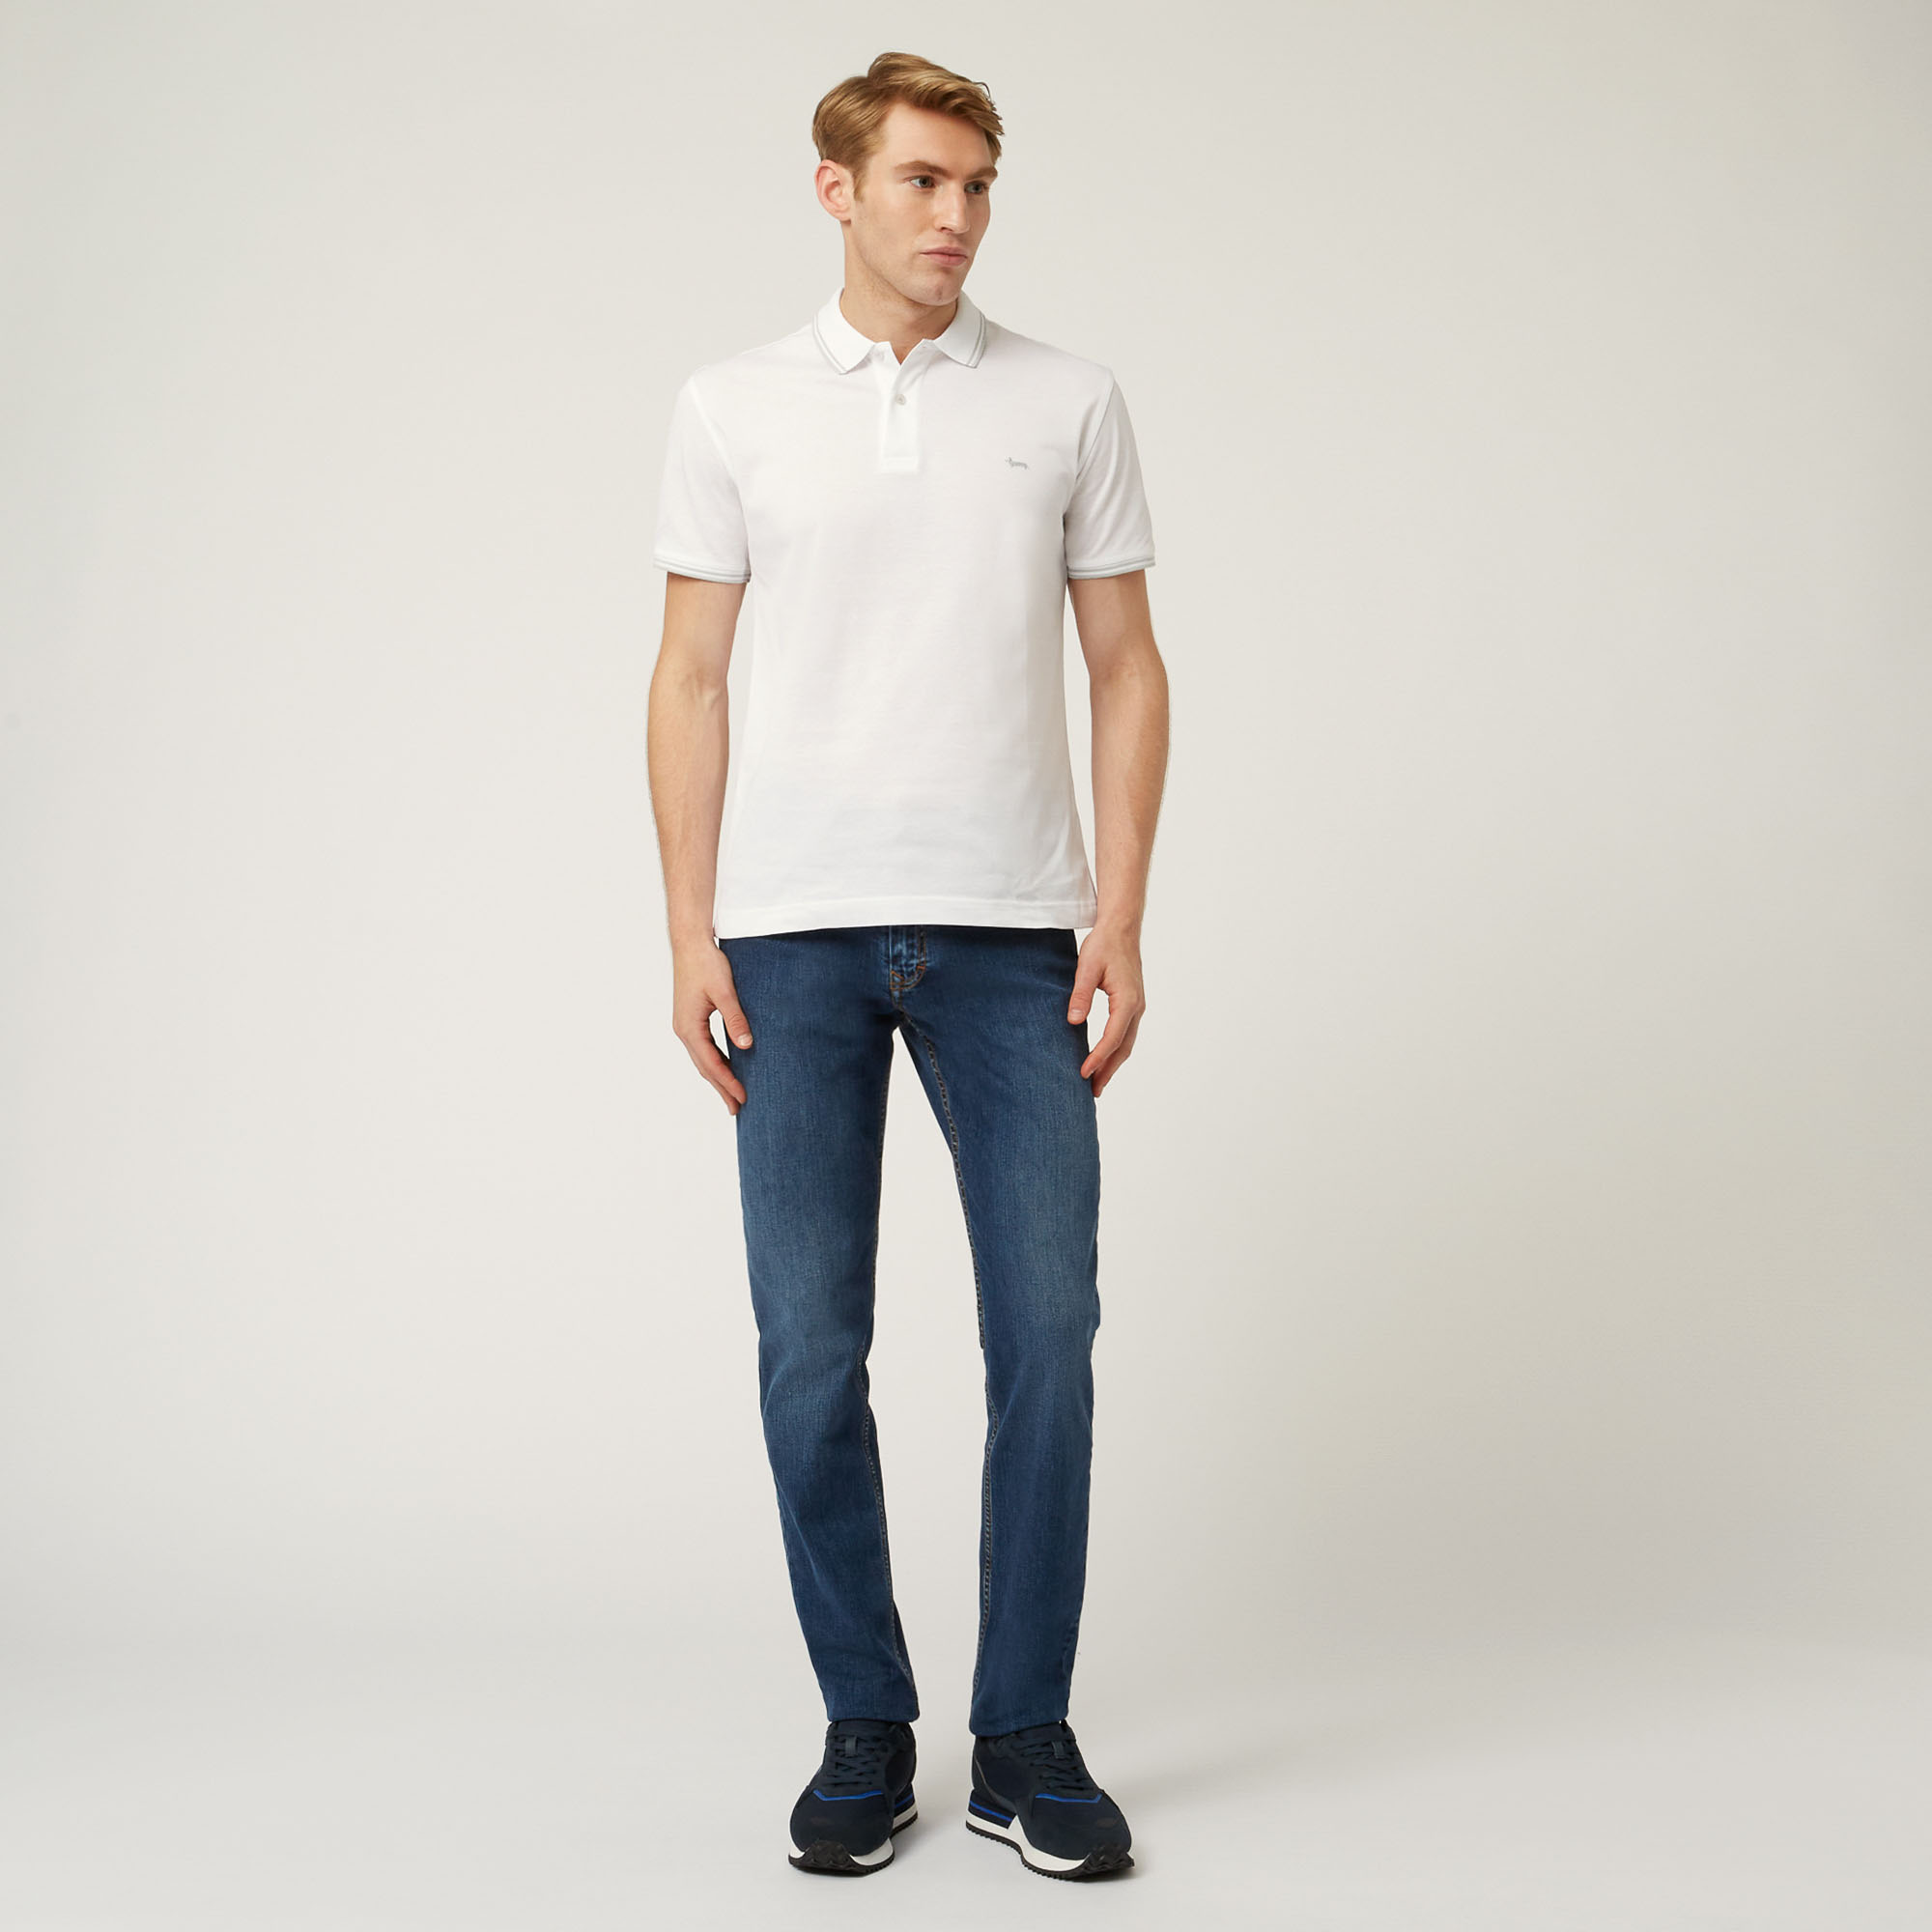 Essentials polo shirt in plain coloured cotton, White, large